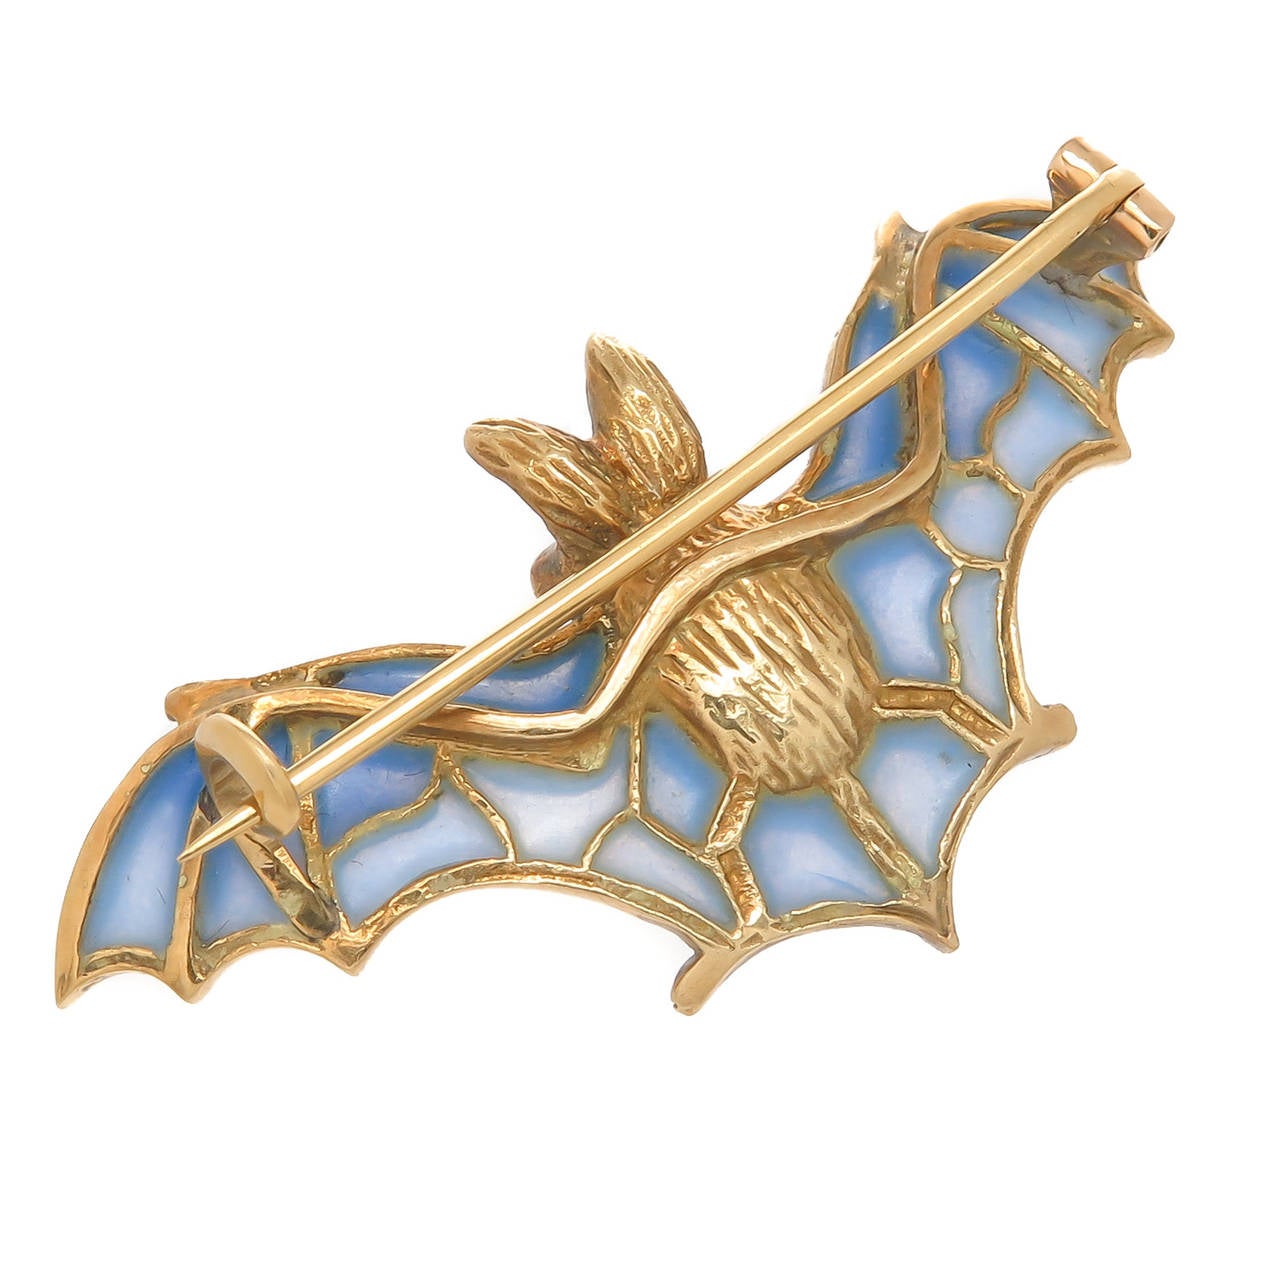 Finely Detailed Bat Brooch, 18K Yellow Gold Rose cut Diamonds and a Ruby Eye, wings finished in a light Blue Plique-A-Jour enamel. Measuring 1 5/8 inch in Length.